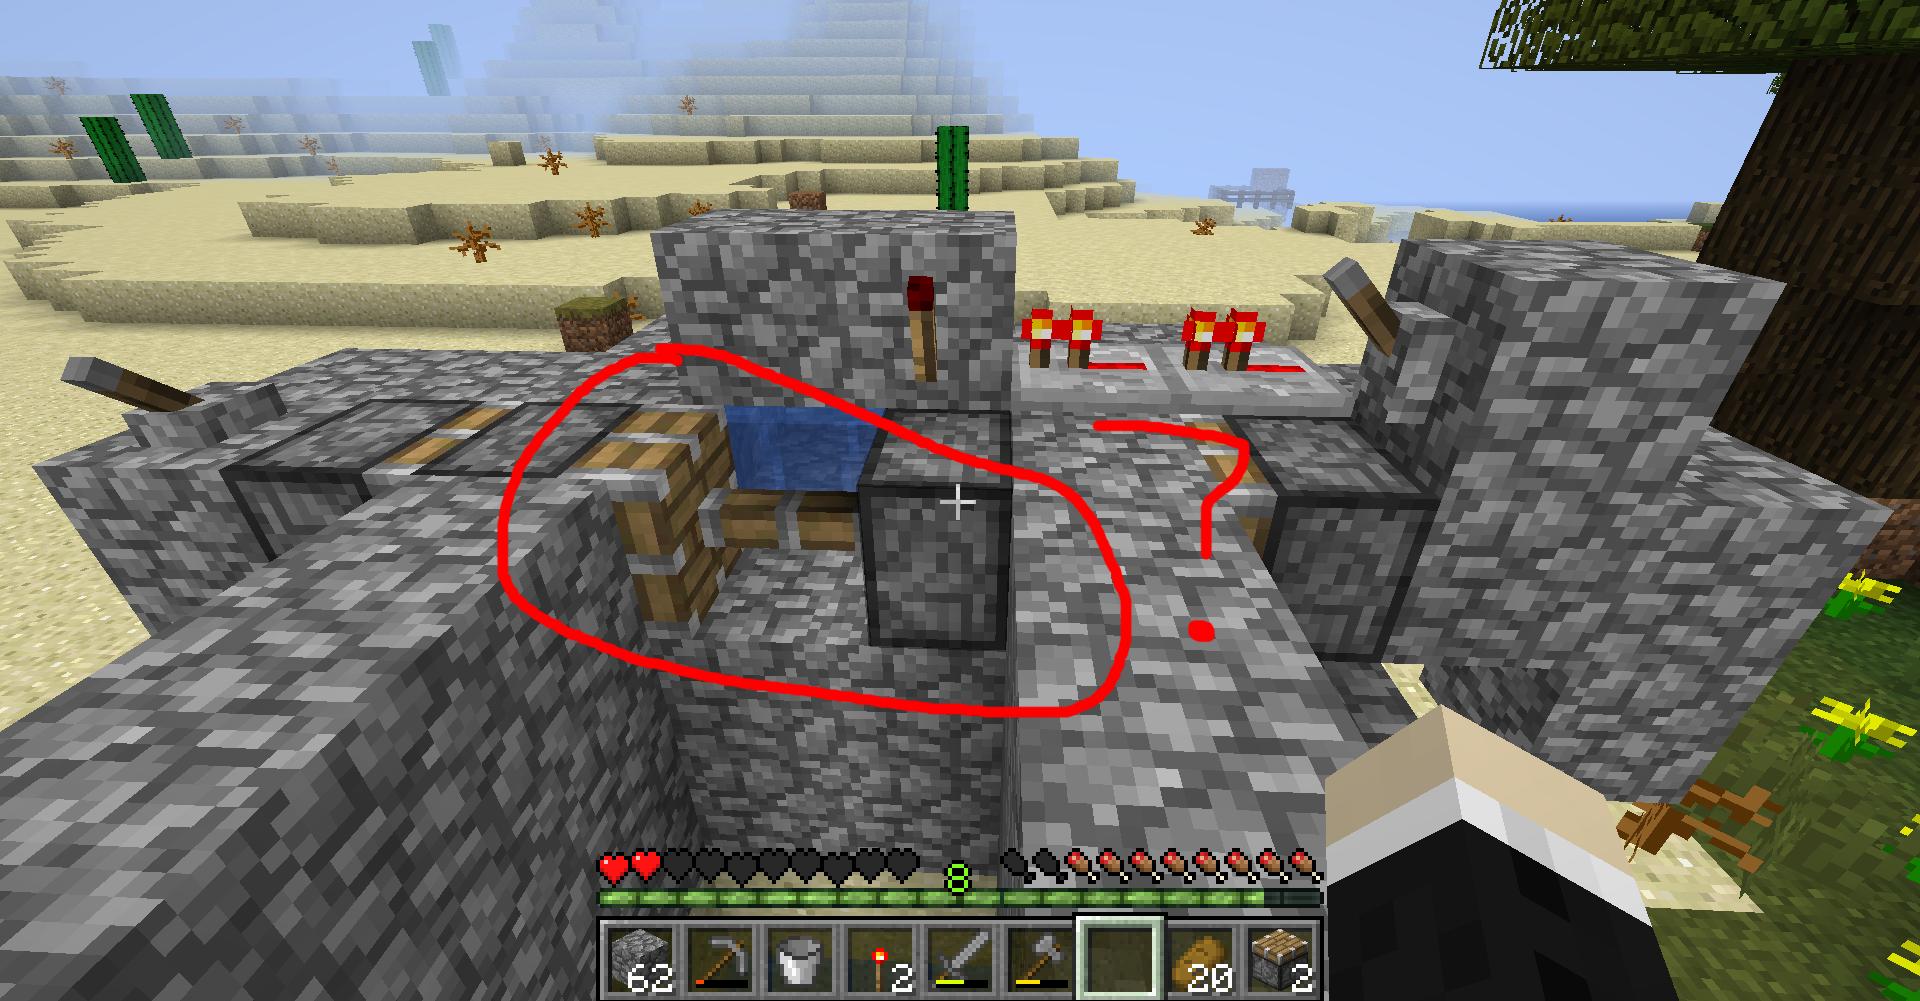 Minecraft Powering a redstone torch on a block adjacent to a redstone lamp without powering the lamp